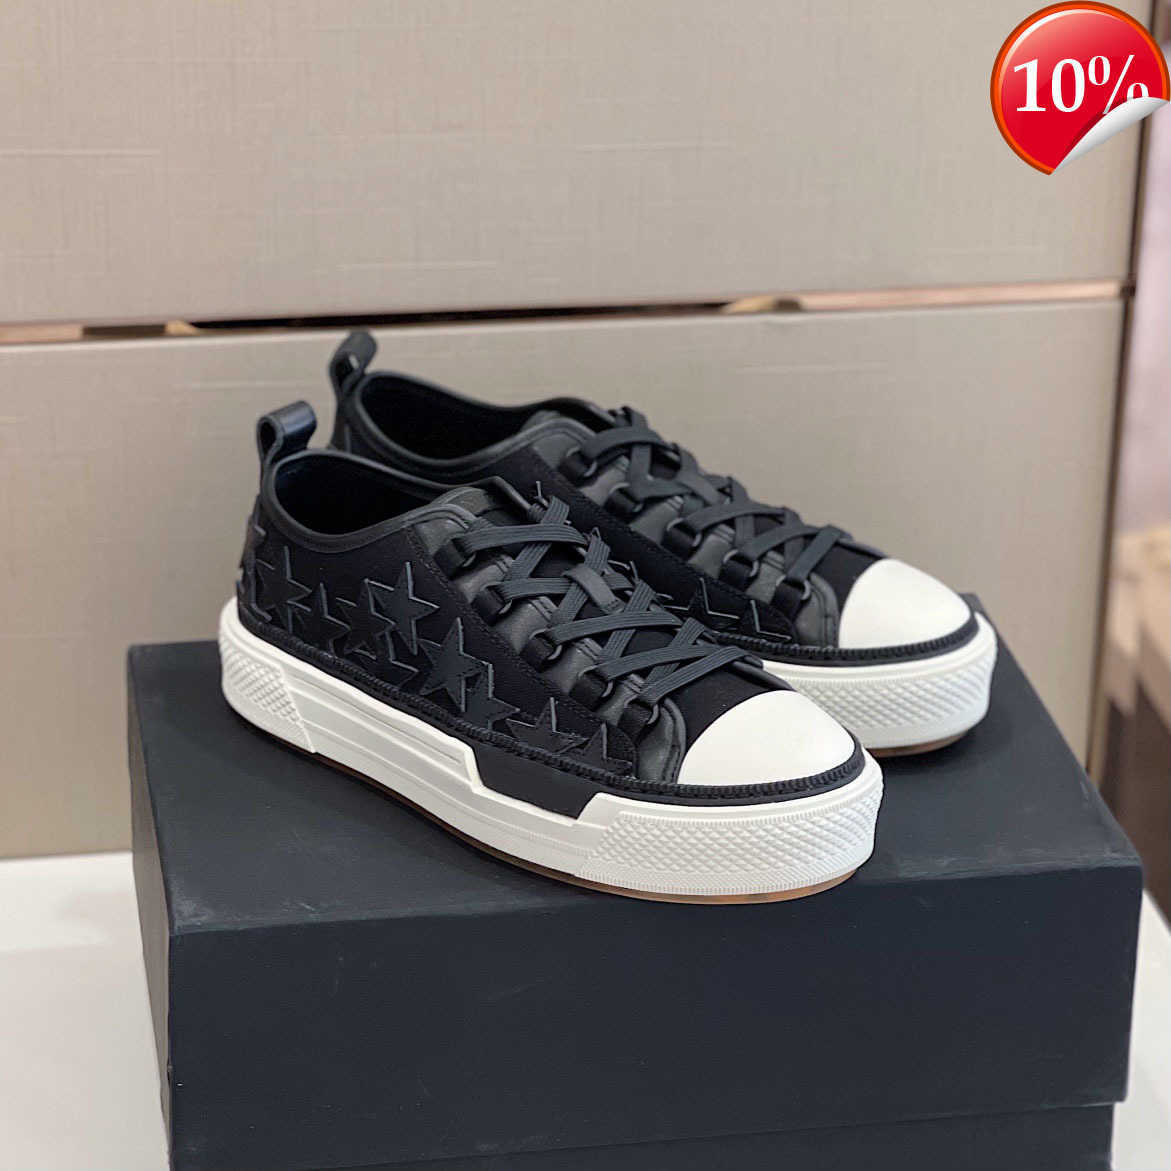 

Fashion Shoes Stars Court Low amiri Sneakers Lace-up Canvas Trainers Embroidery Los Angeles Street Style Stars Patches Ami Ri A Miri 35-45 Unisex, 6 as picture